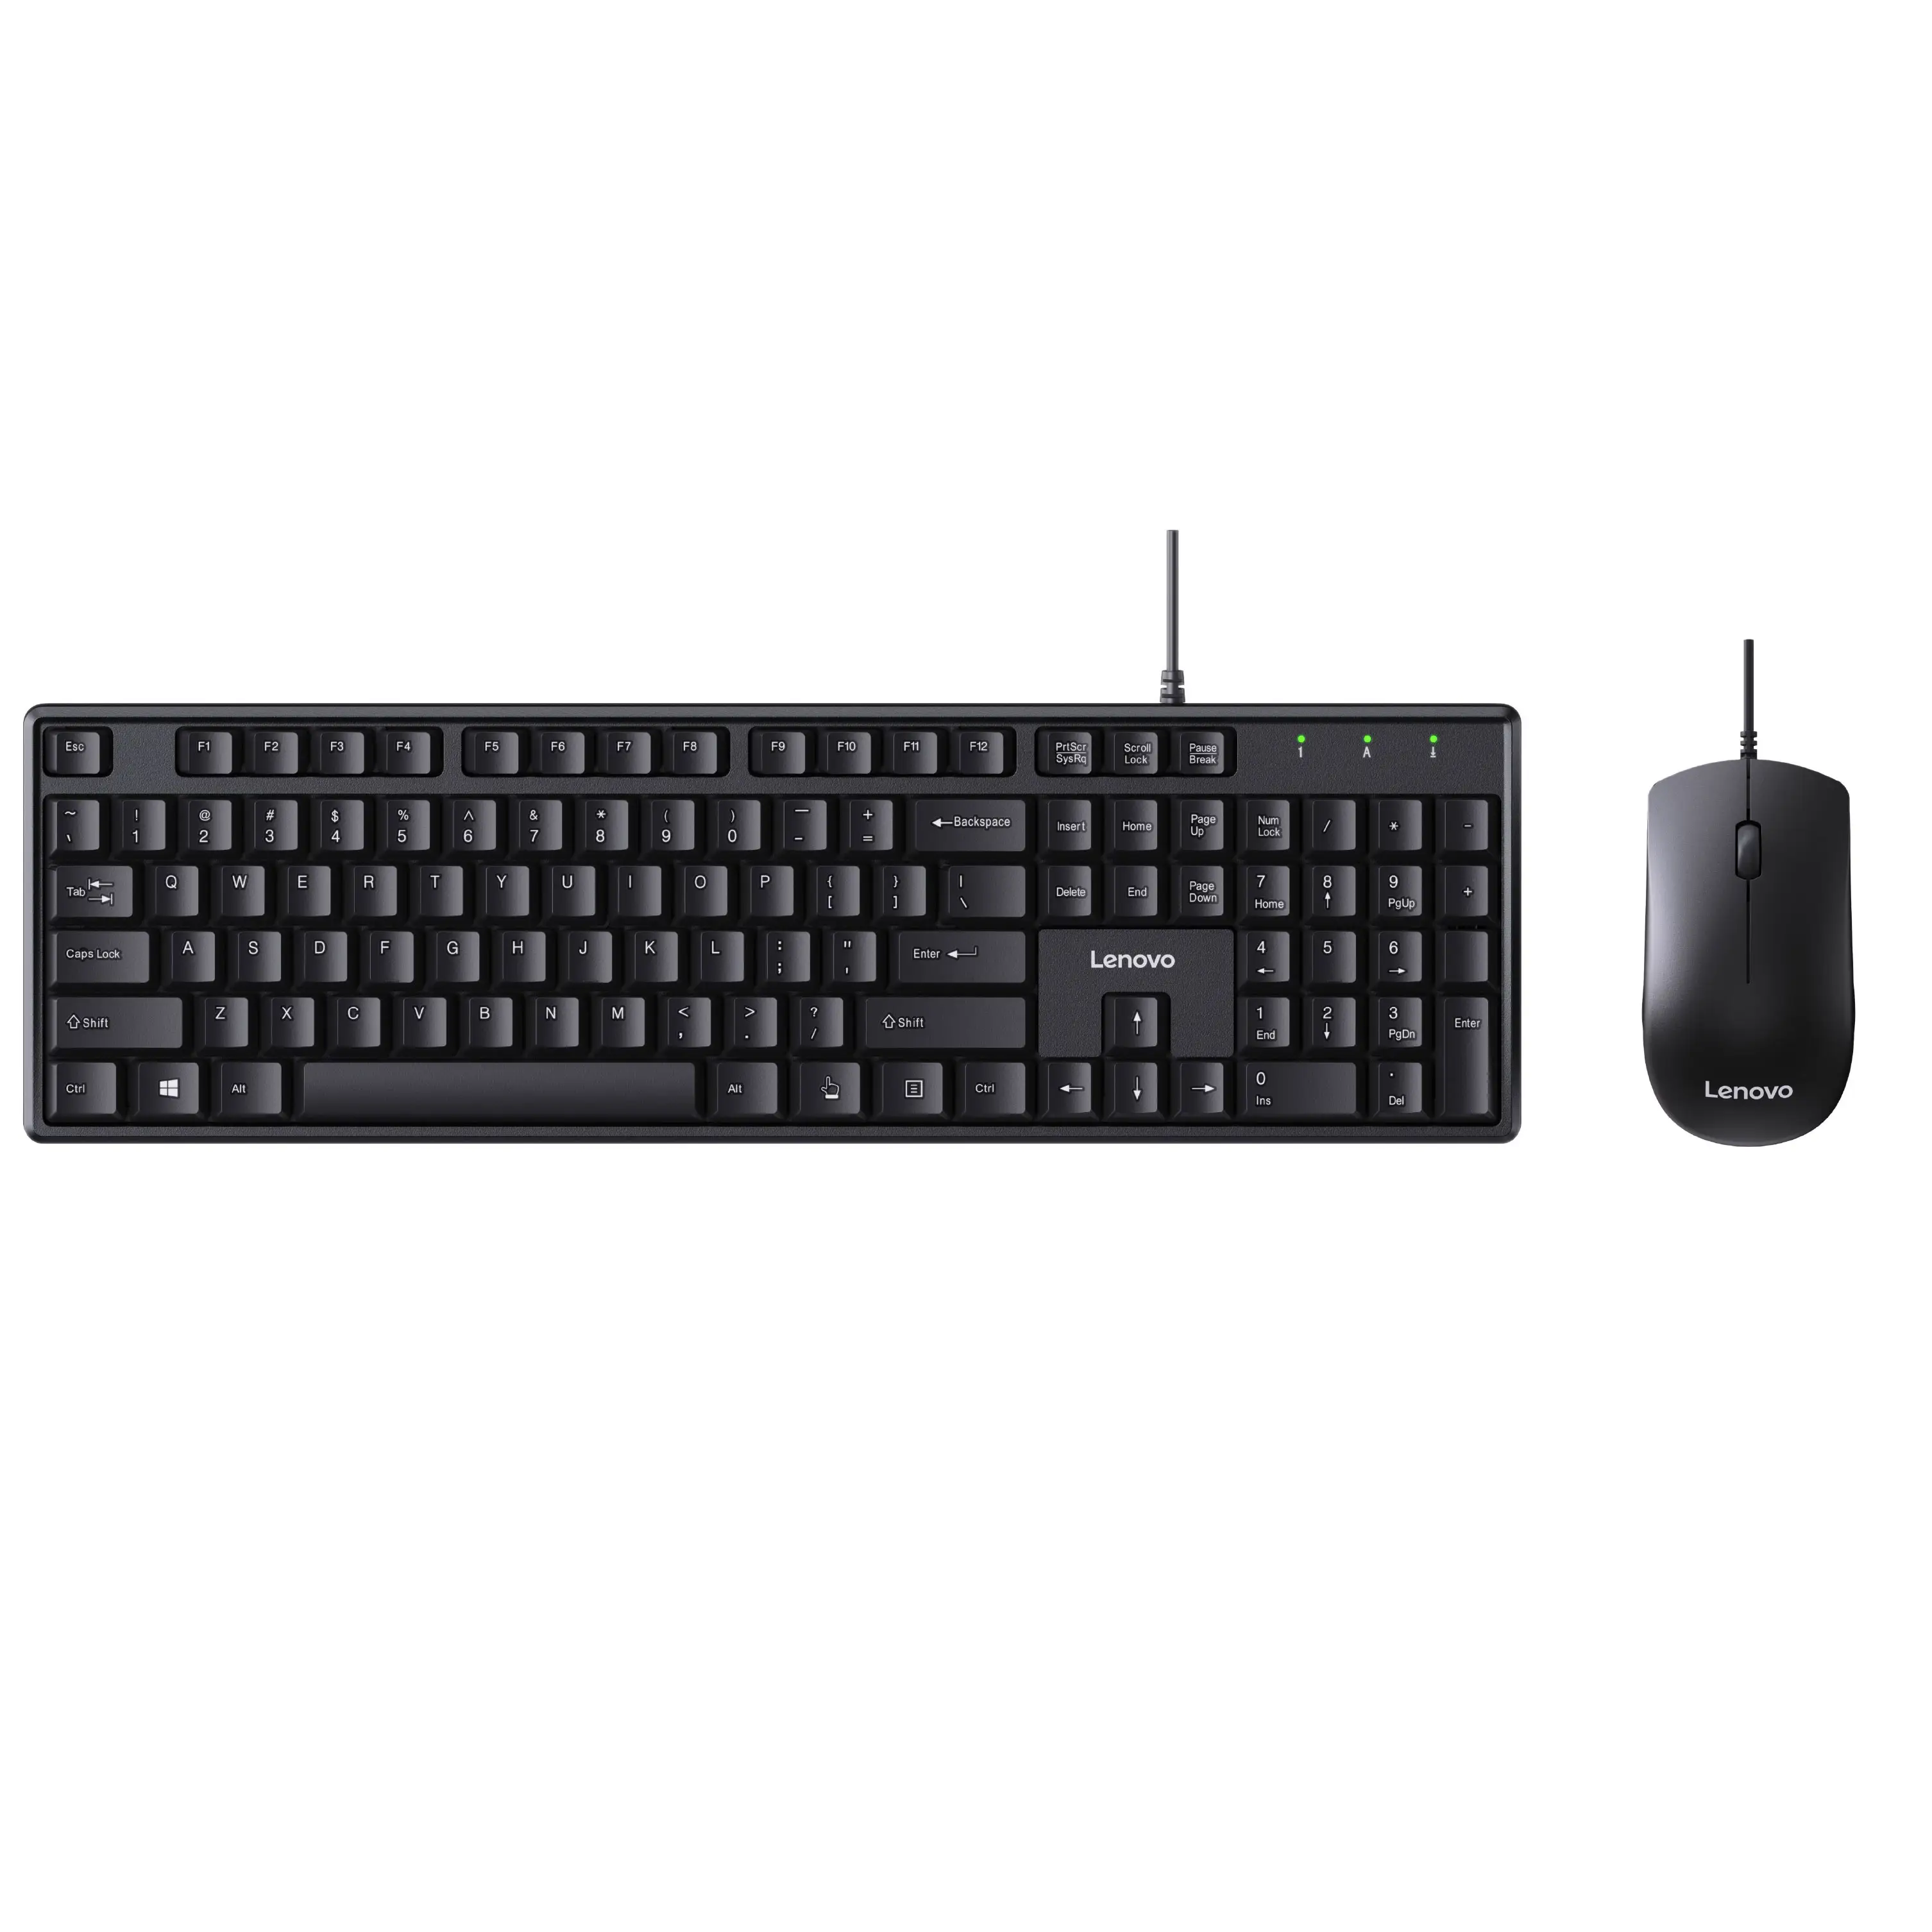 for Lenovo MK11 business wired keyboard and mouse set desktop computer office game keyboard and mouse